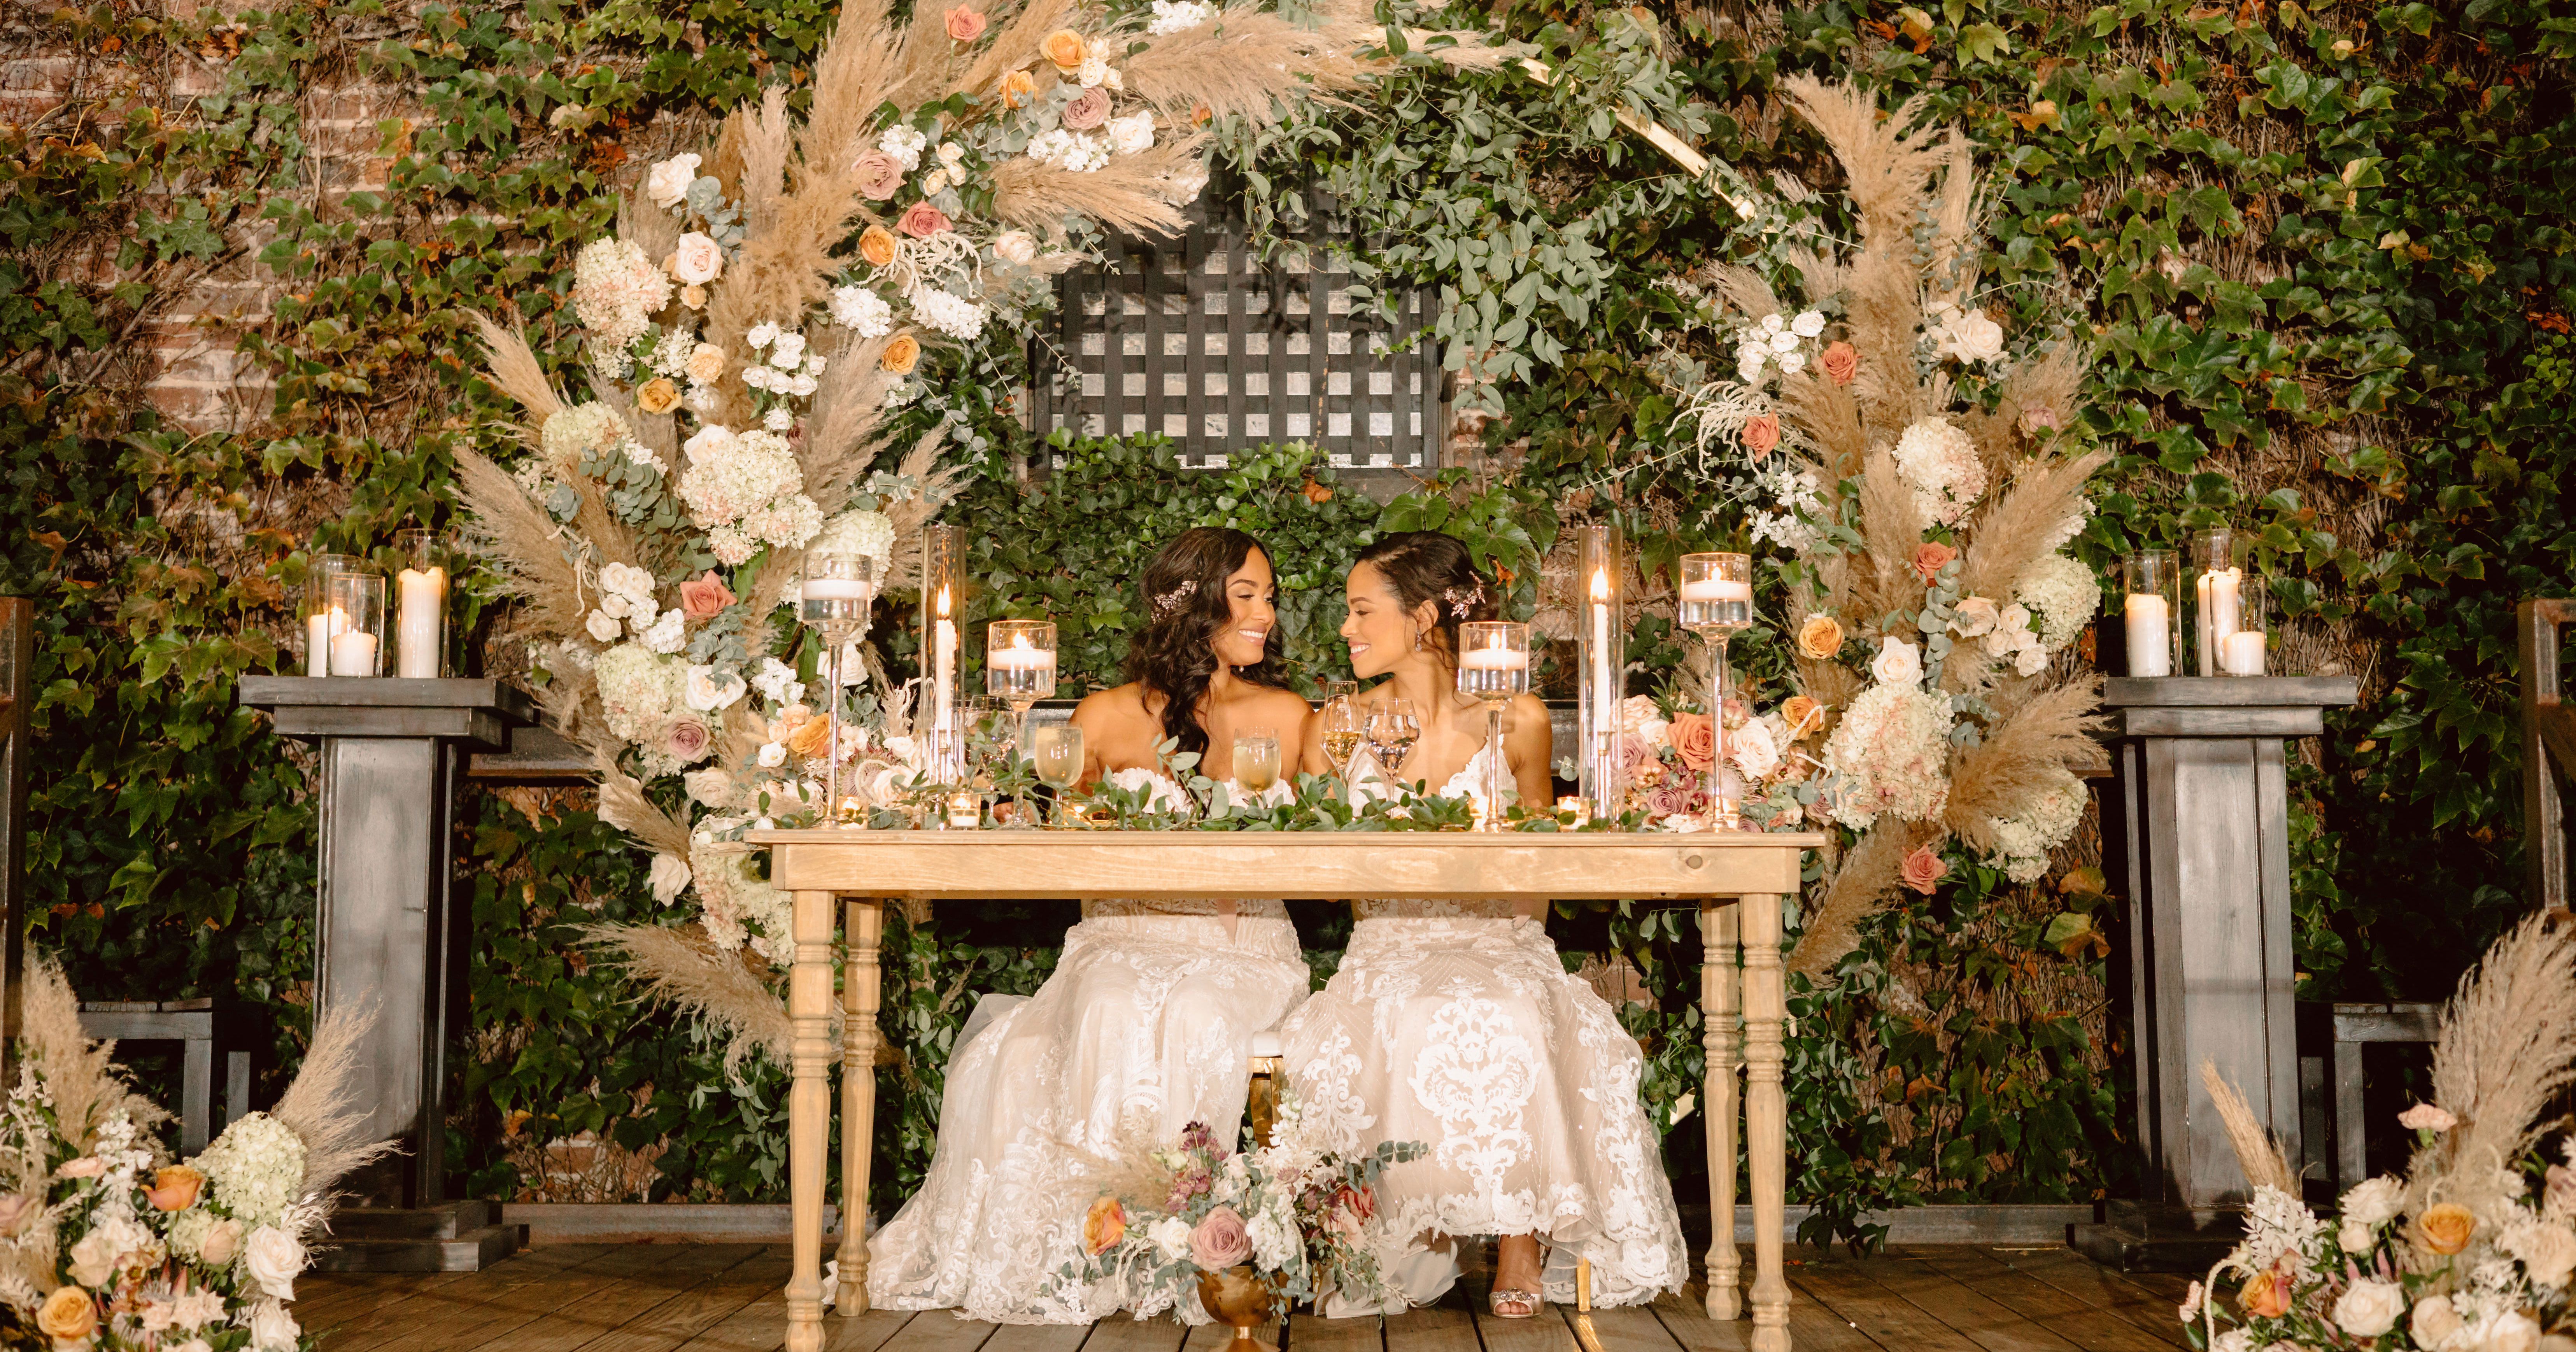 The Biggest Wedding Trends to Expect in 2021